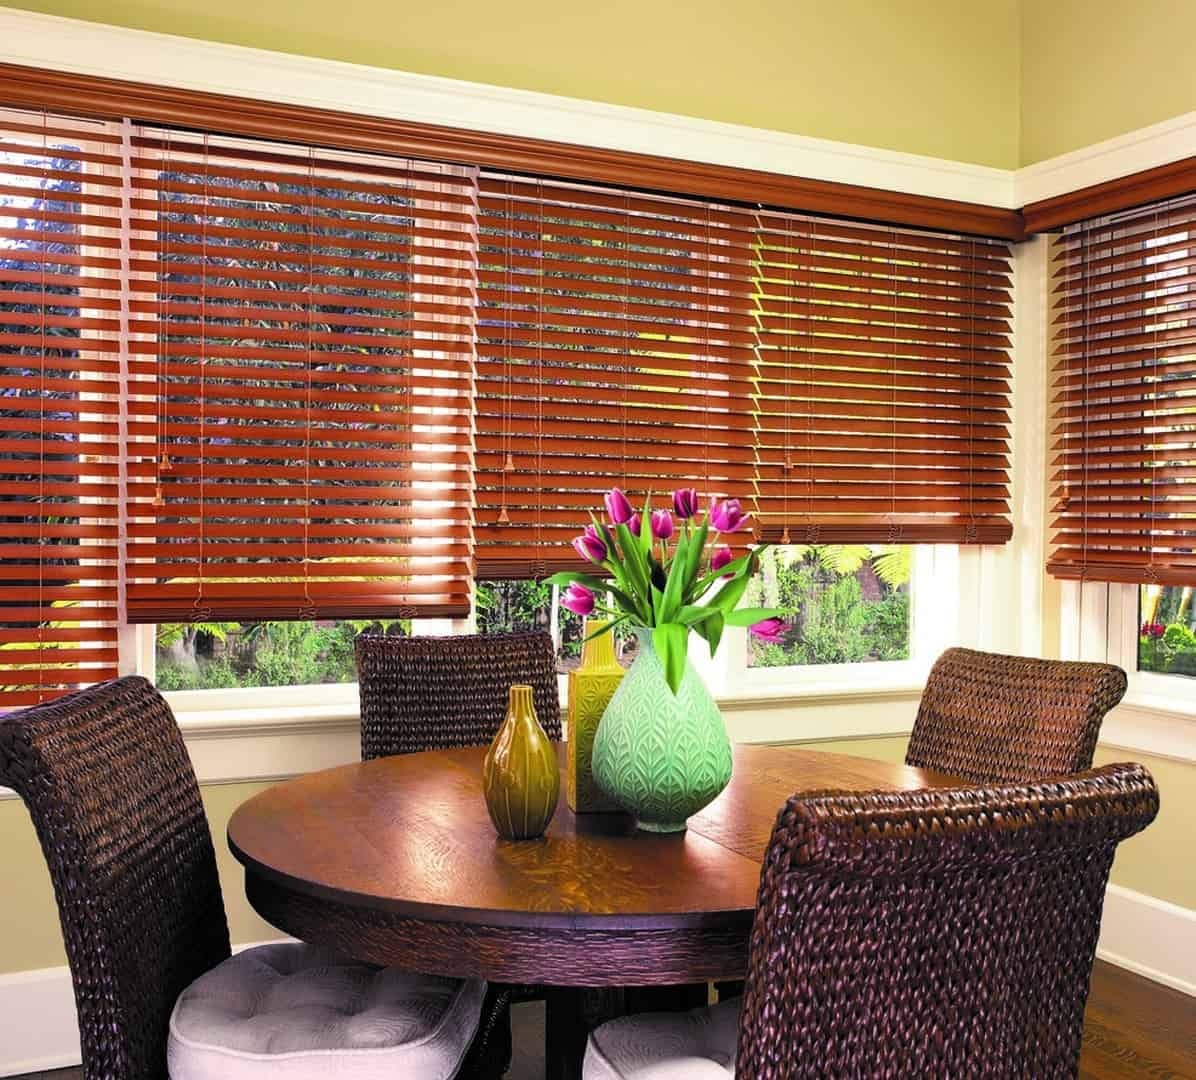 Autumn Blind Options for Homes Near Anaheim, California (CA), for light control, privacy, and warm tones. 